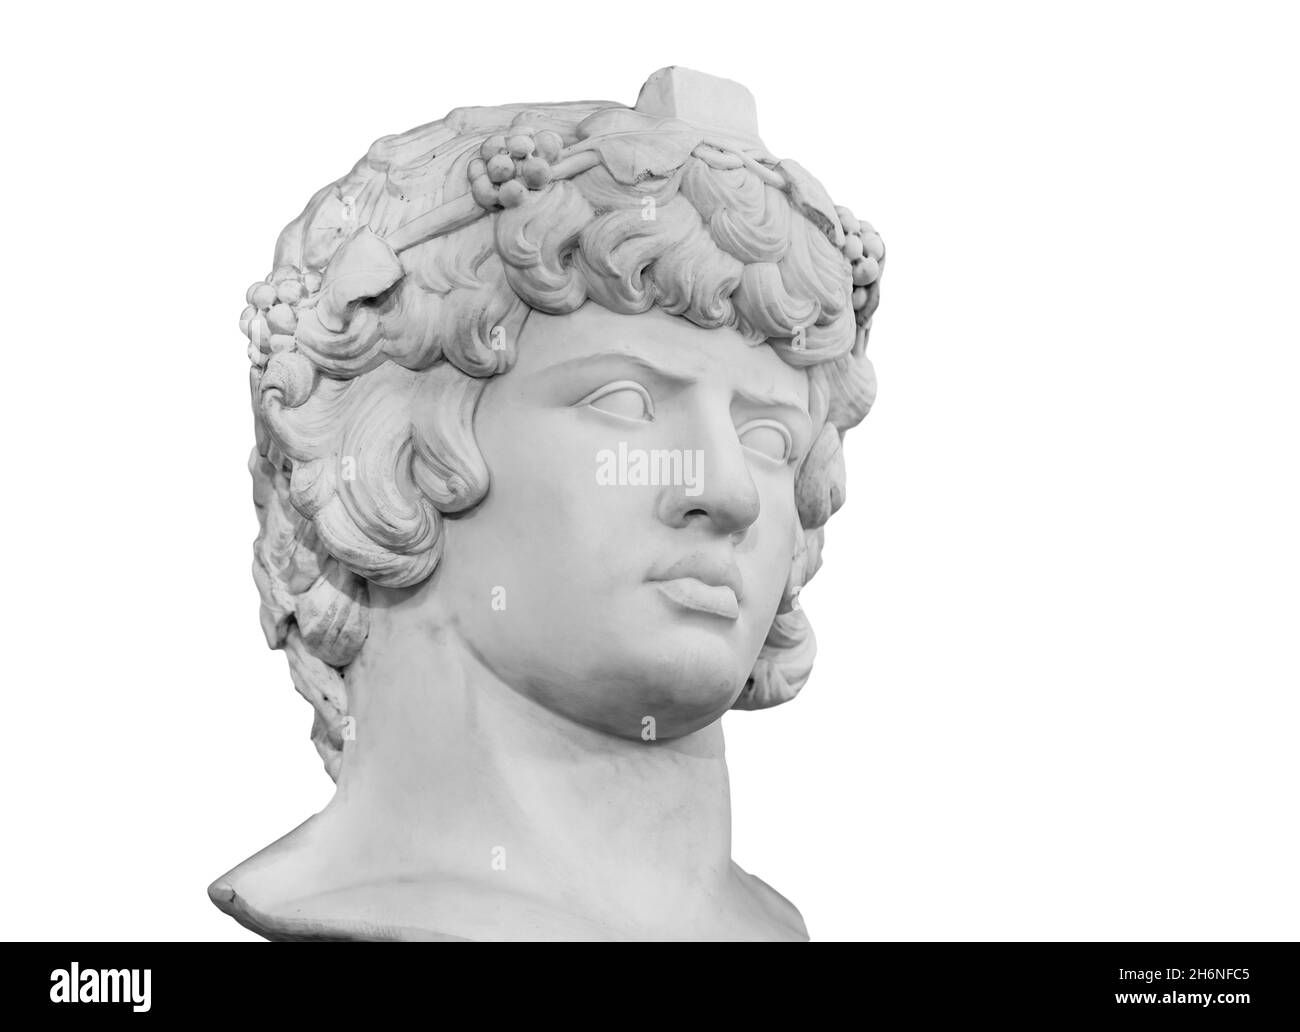 Gypsum copy of famous ancient statue Antinous head isolated on a white background. Plaster antique sculpture young man face. Renaissance epoch Stock Photo